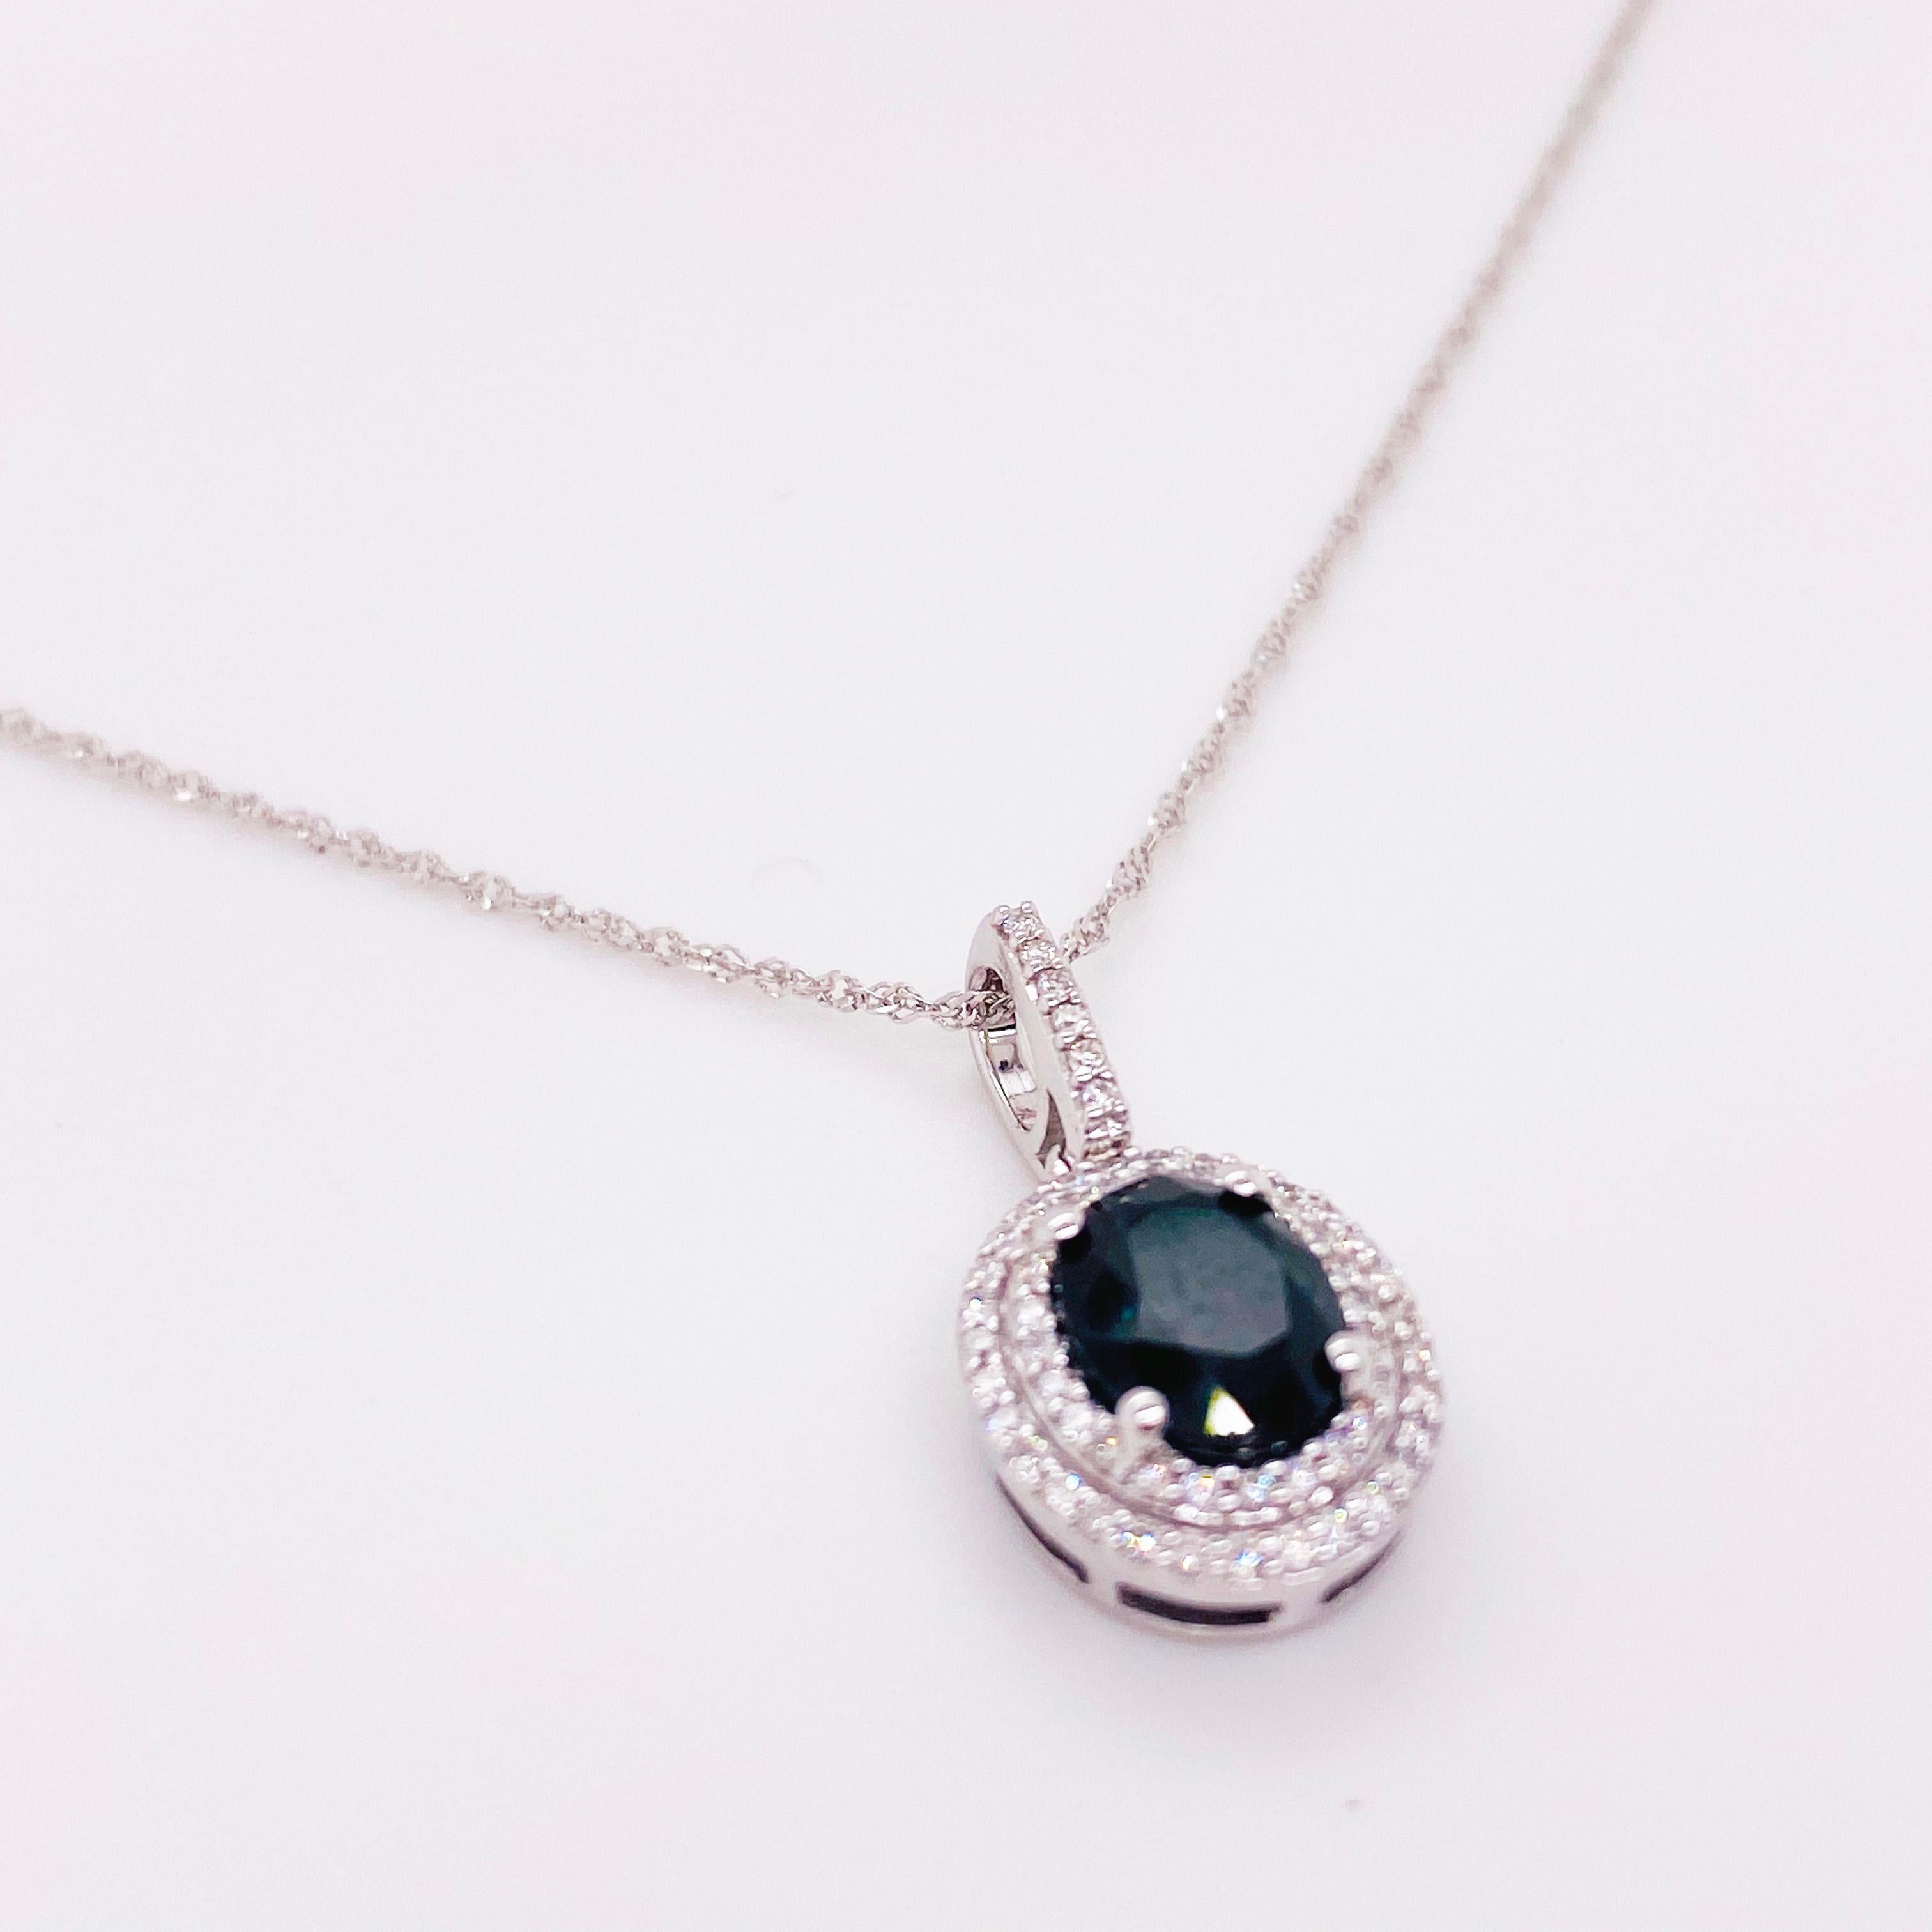 14K White Gold Diamond and Oval Sapphire Necklace With Double Halo of Diamonds:
This extraordinary necklace has 60 diamonds in a double halo and a diamond bail with an oval sapphire in the center that is set with four prongs.  The gorgeous pendant